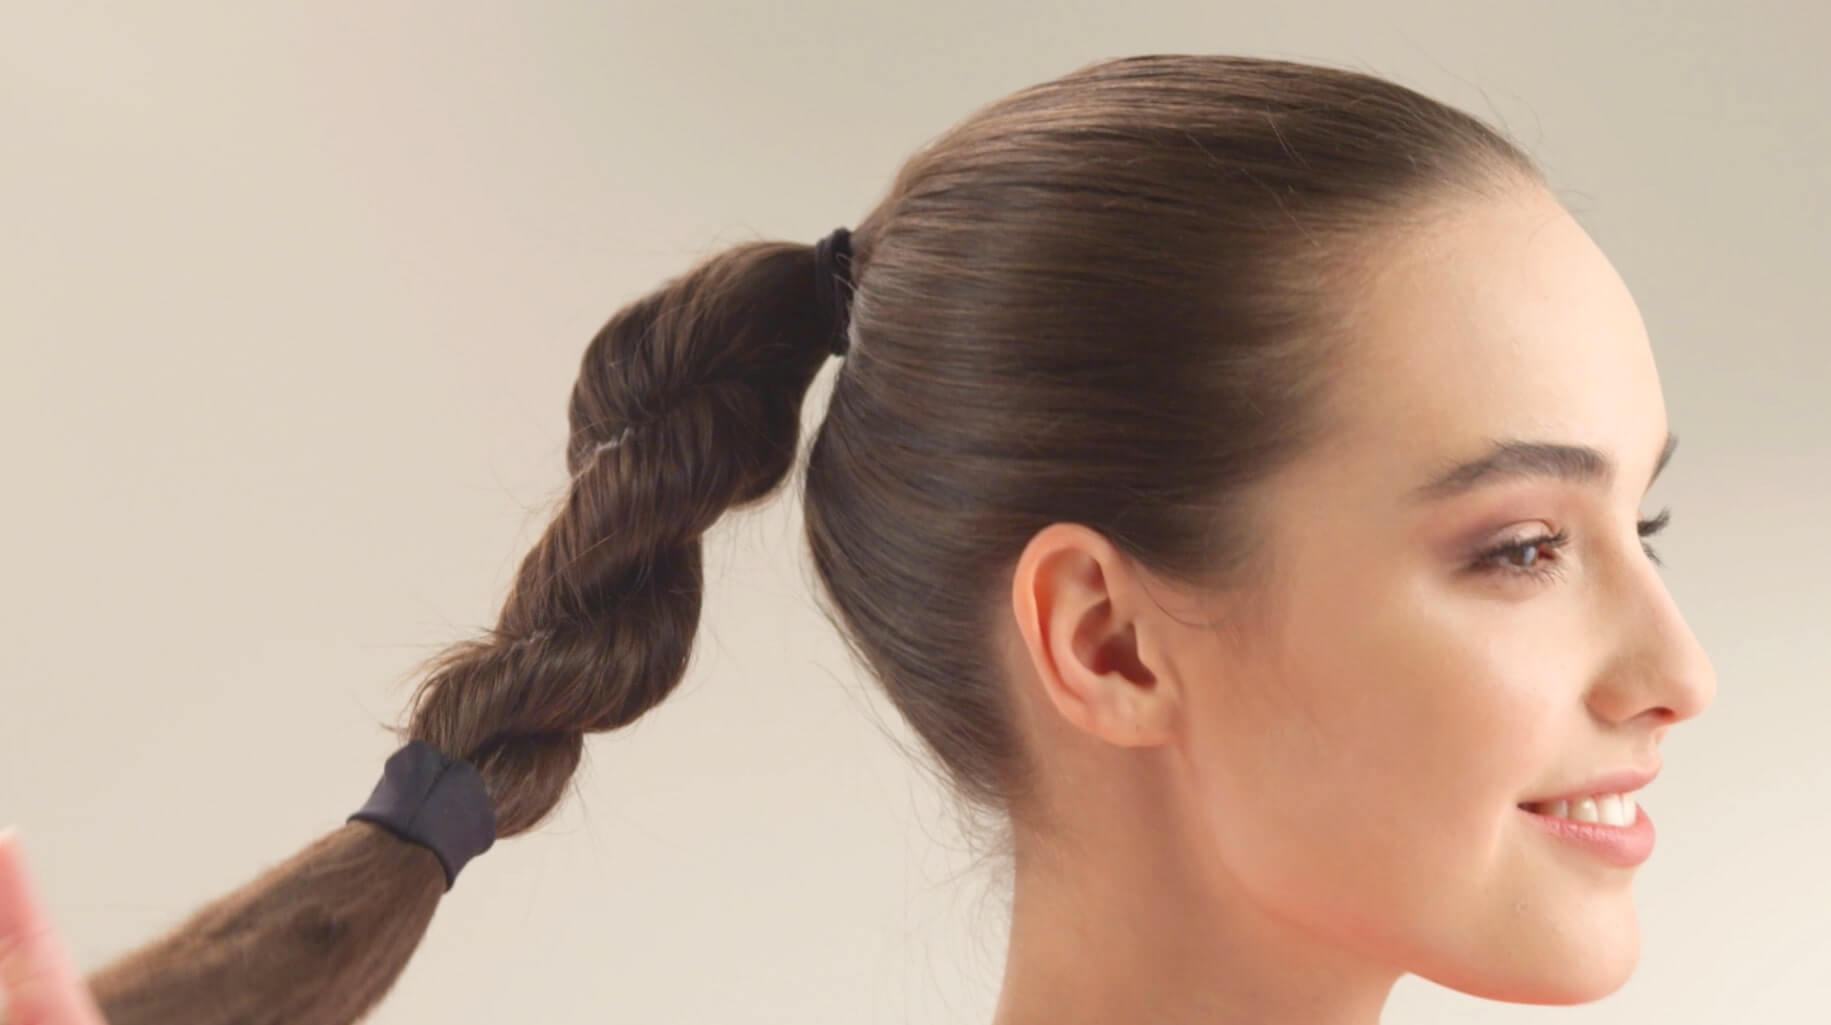 How to style quick & easy workout braid